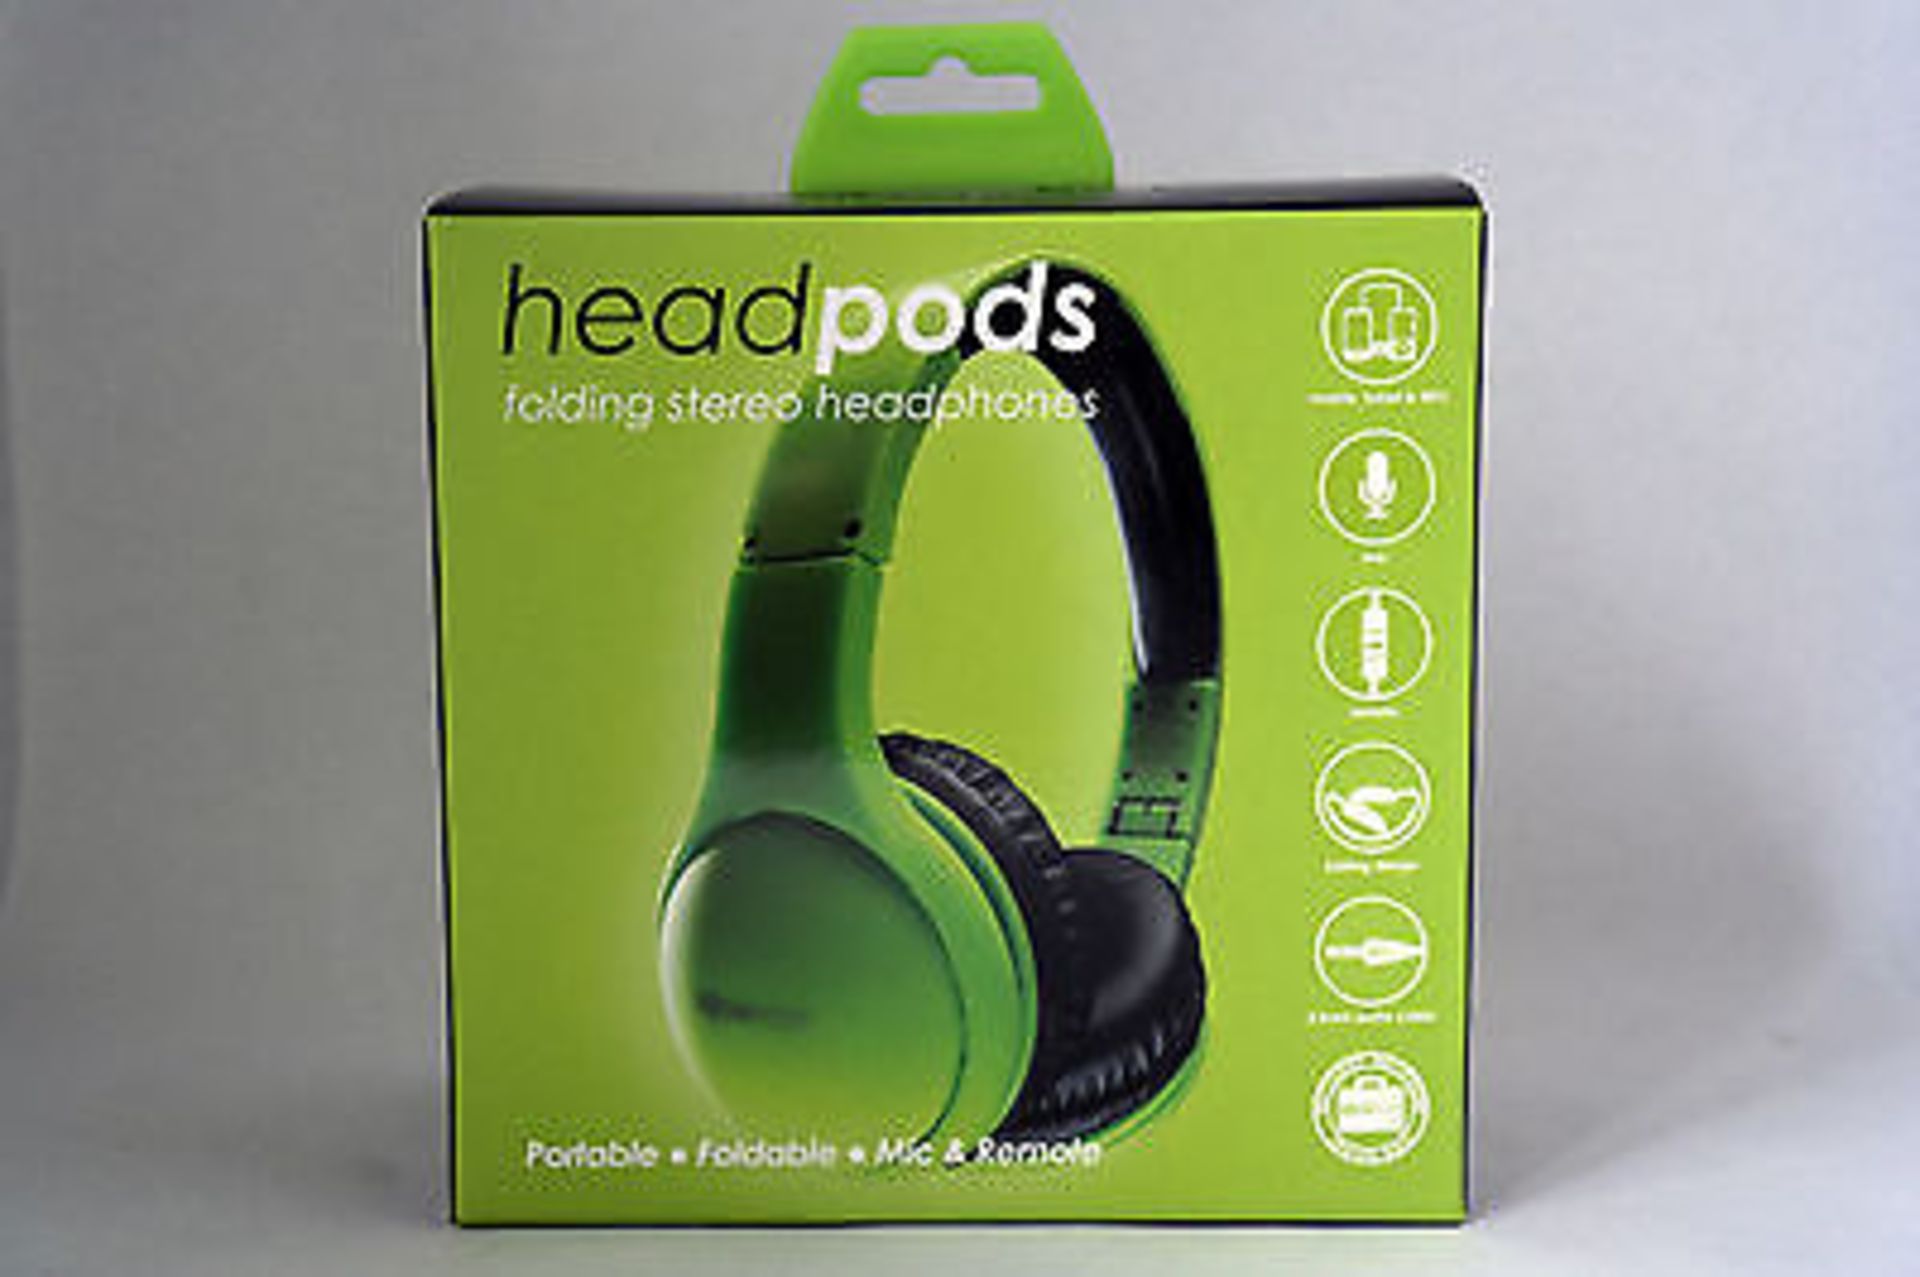 V Brand New Boompods Headpods Foldable Soft Touch Headphones In Green Includes IPhone Remote With